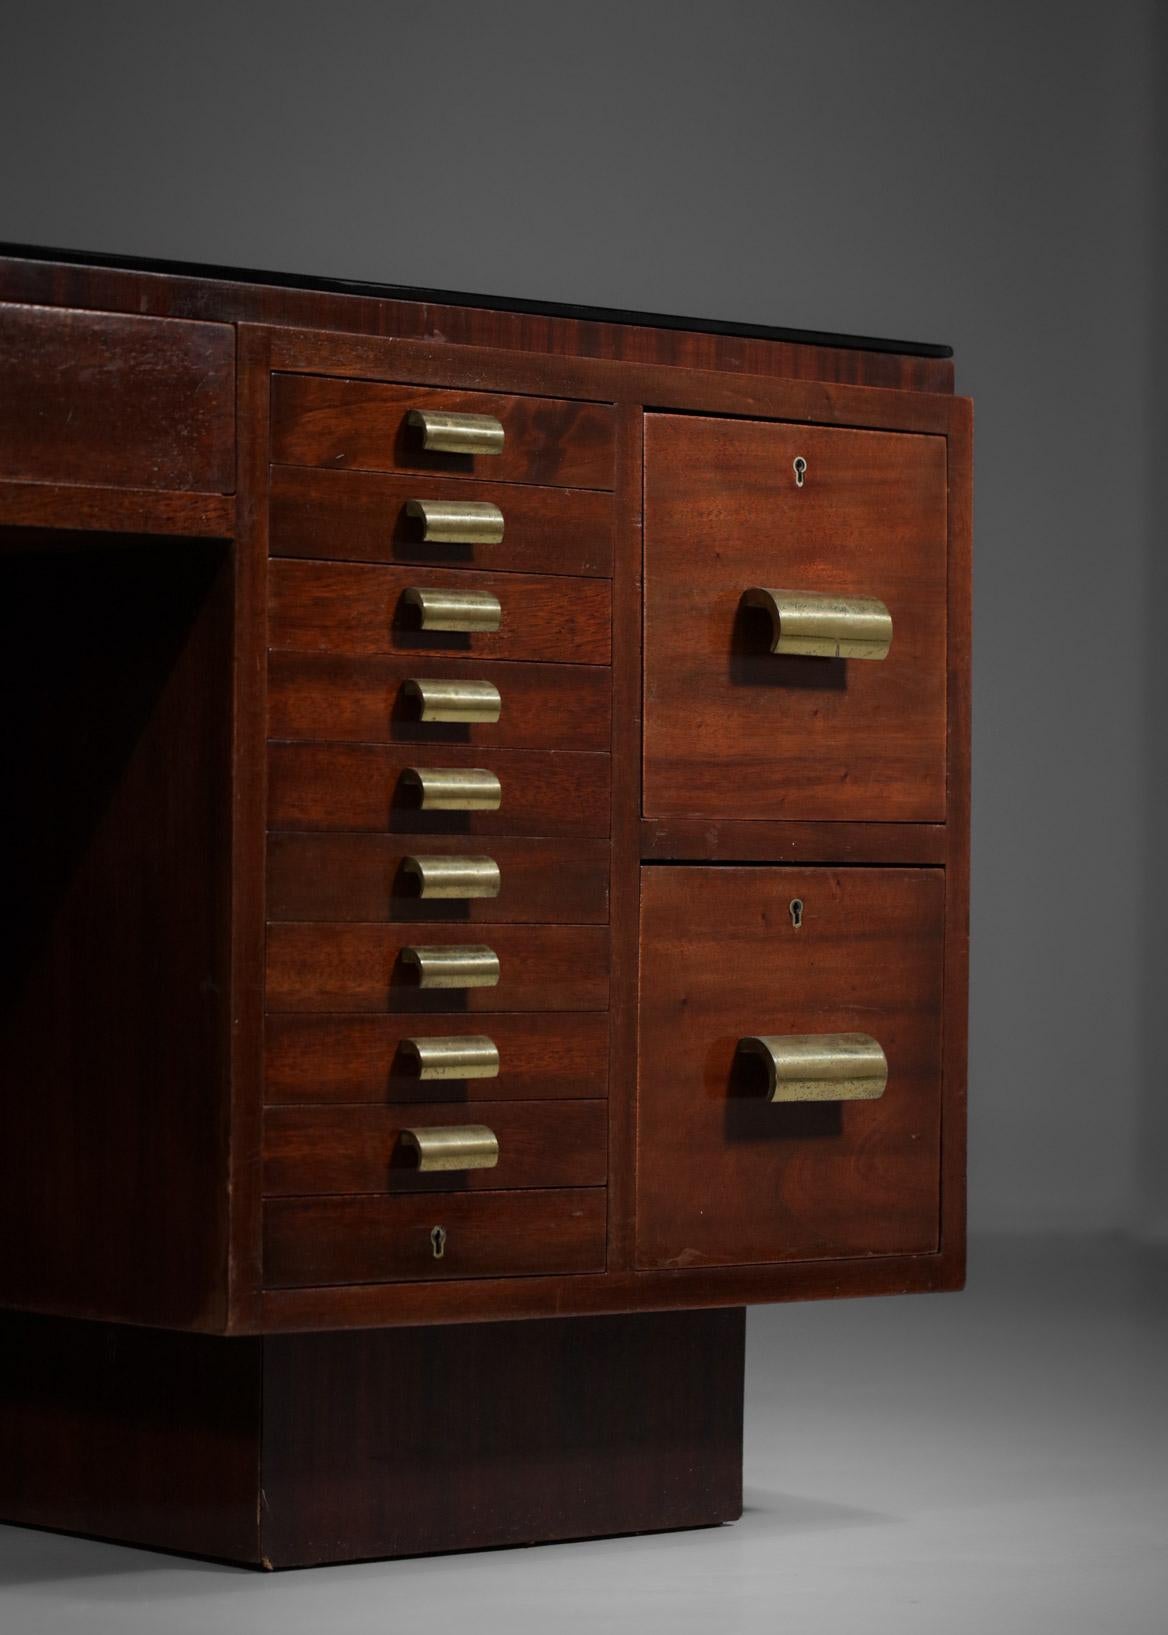 Imposing 1940's French Modernist Desk in Mahogany in Style of Dupré Lafon, E498 For Sale 3